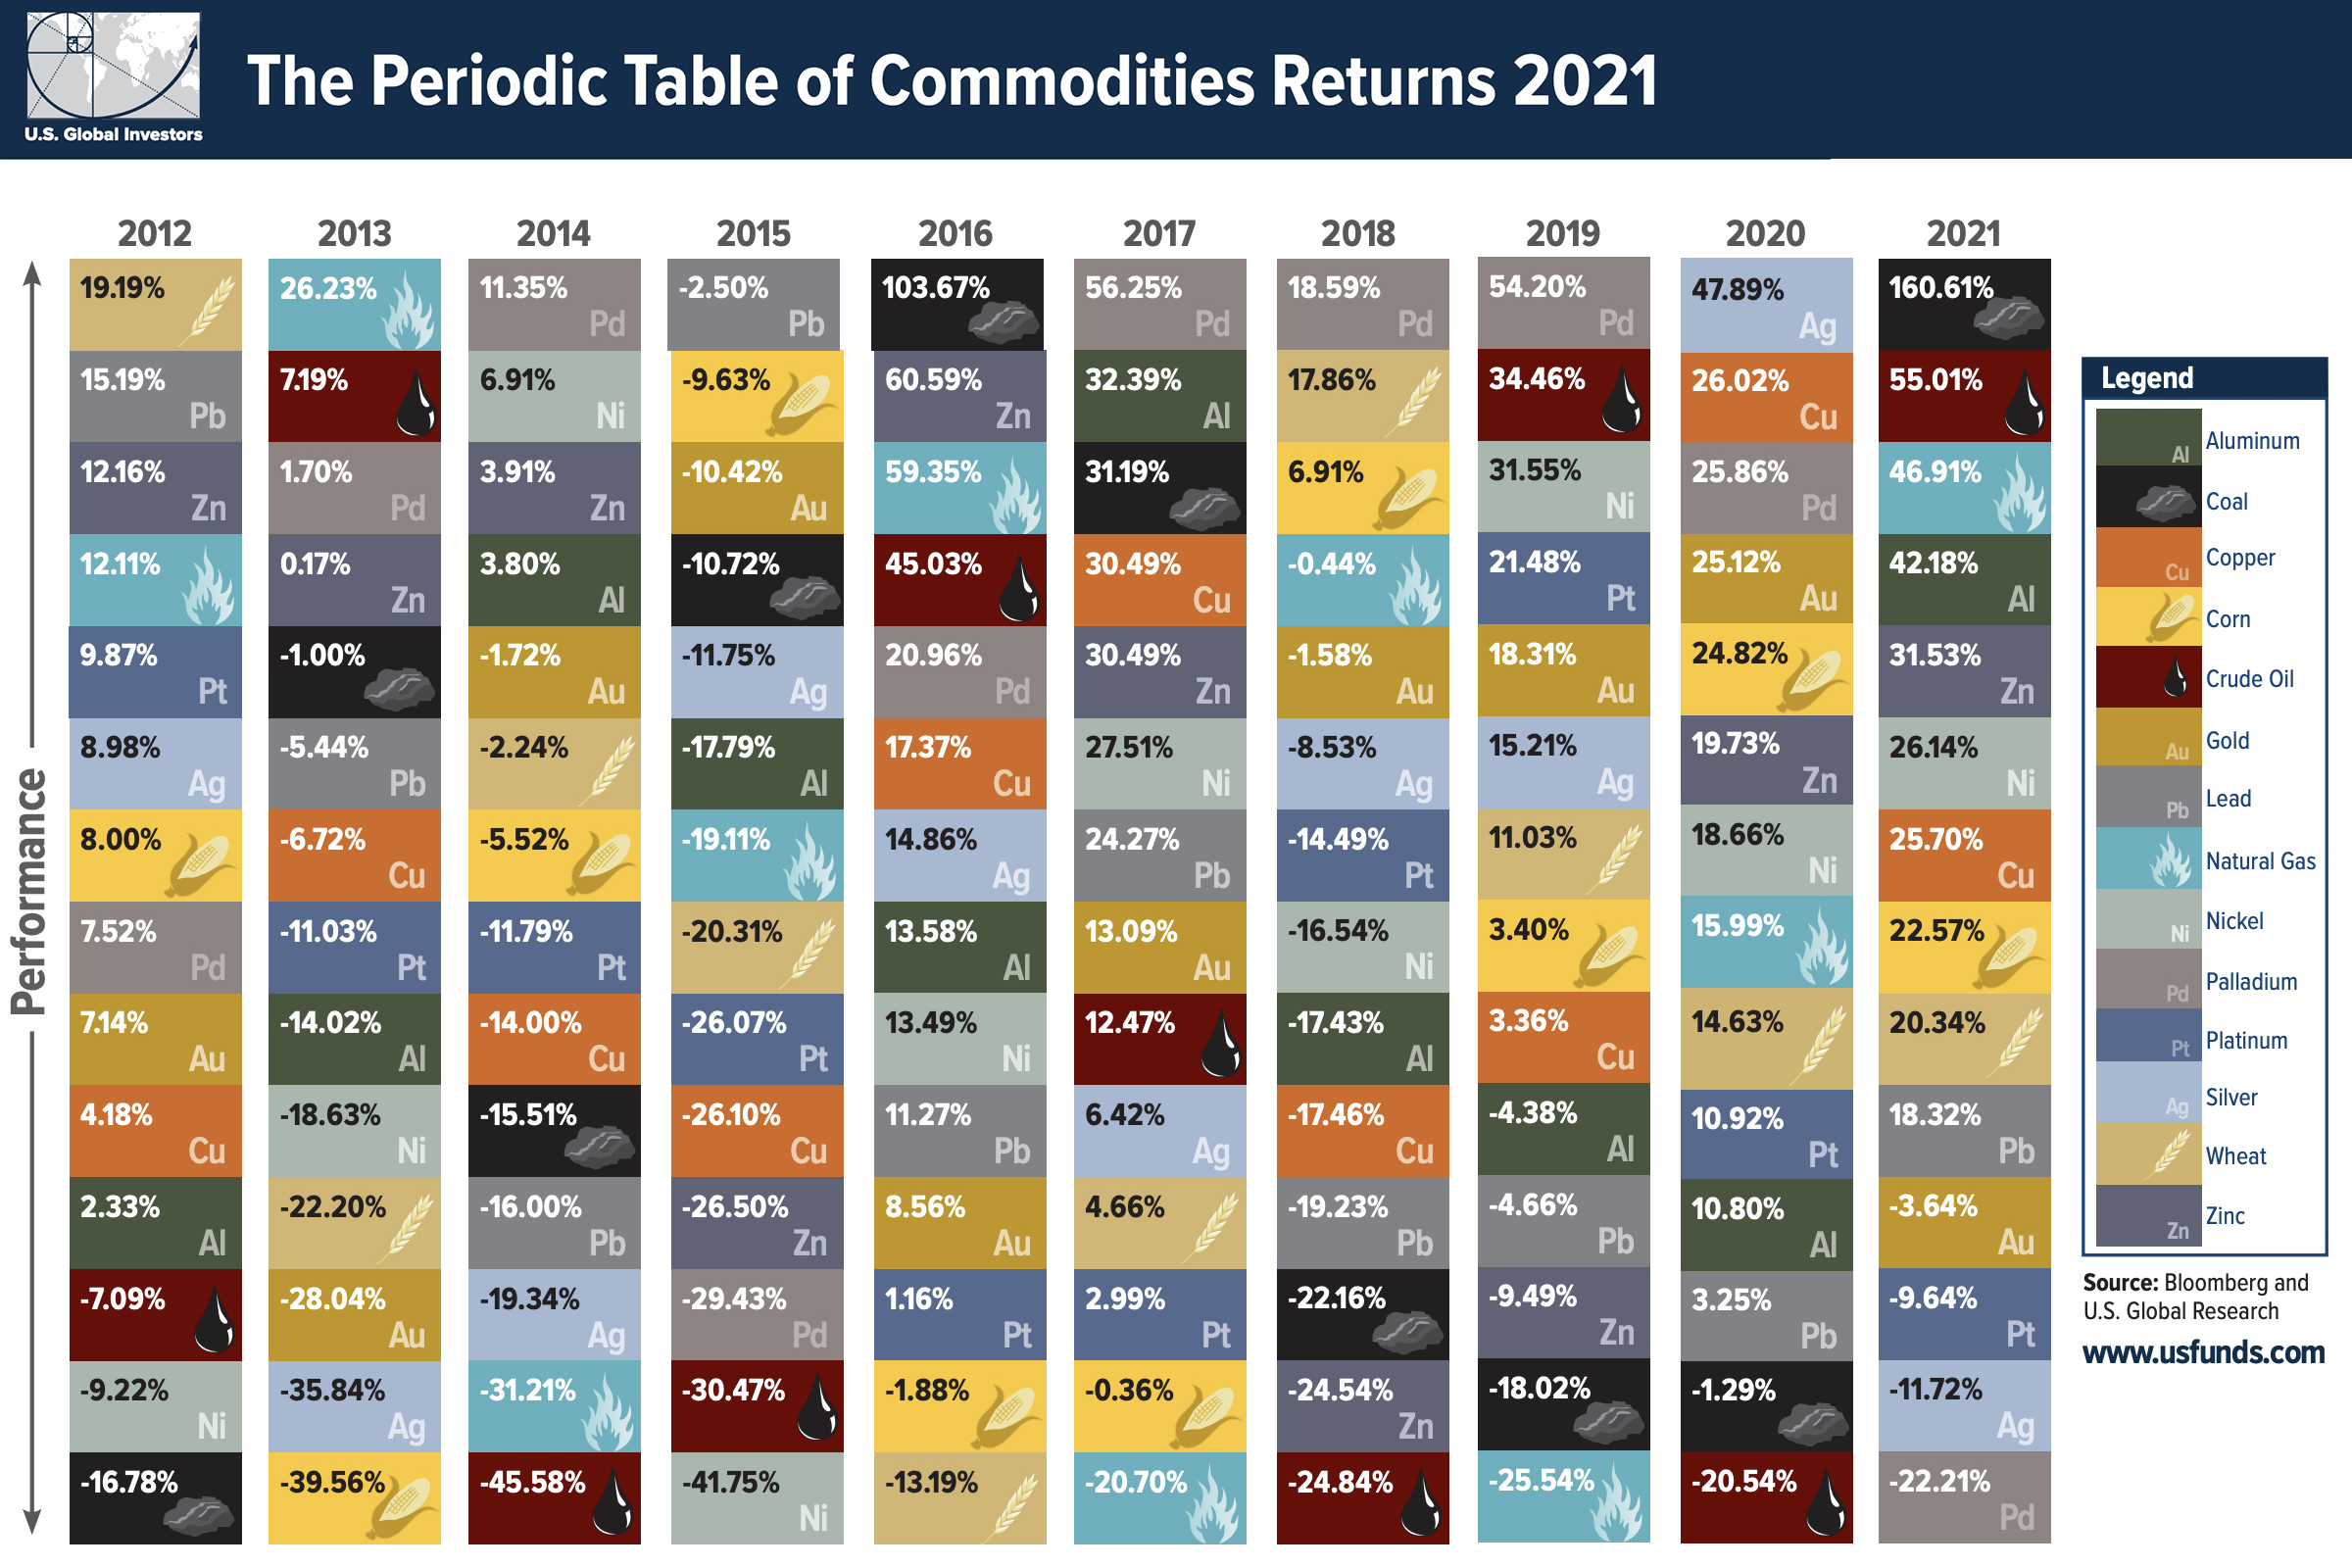 https://www.visualcapitalist.com/wp-content/uploads/2022/01/period-table-of-commodity-returns-2021-copy.jpg